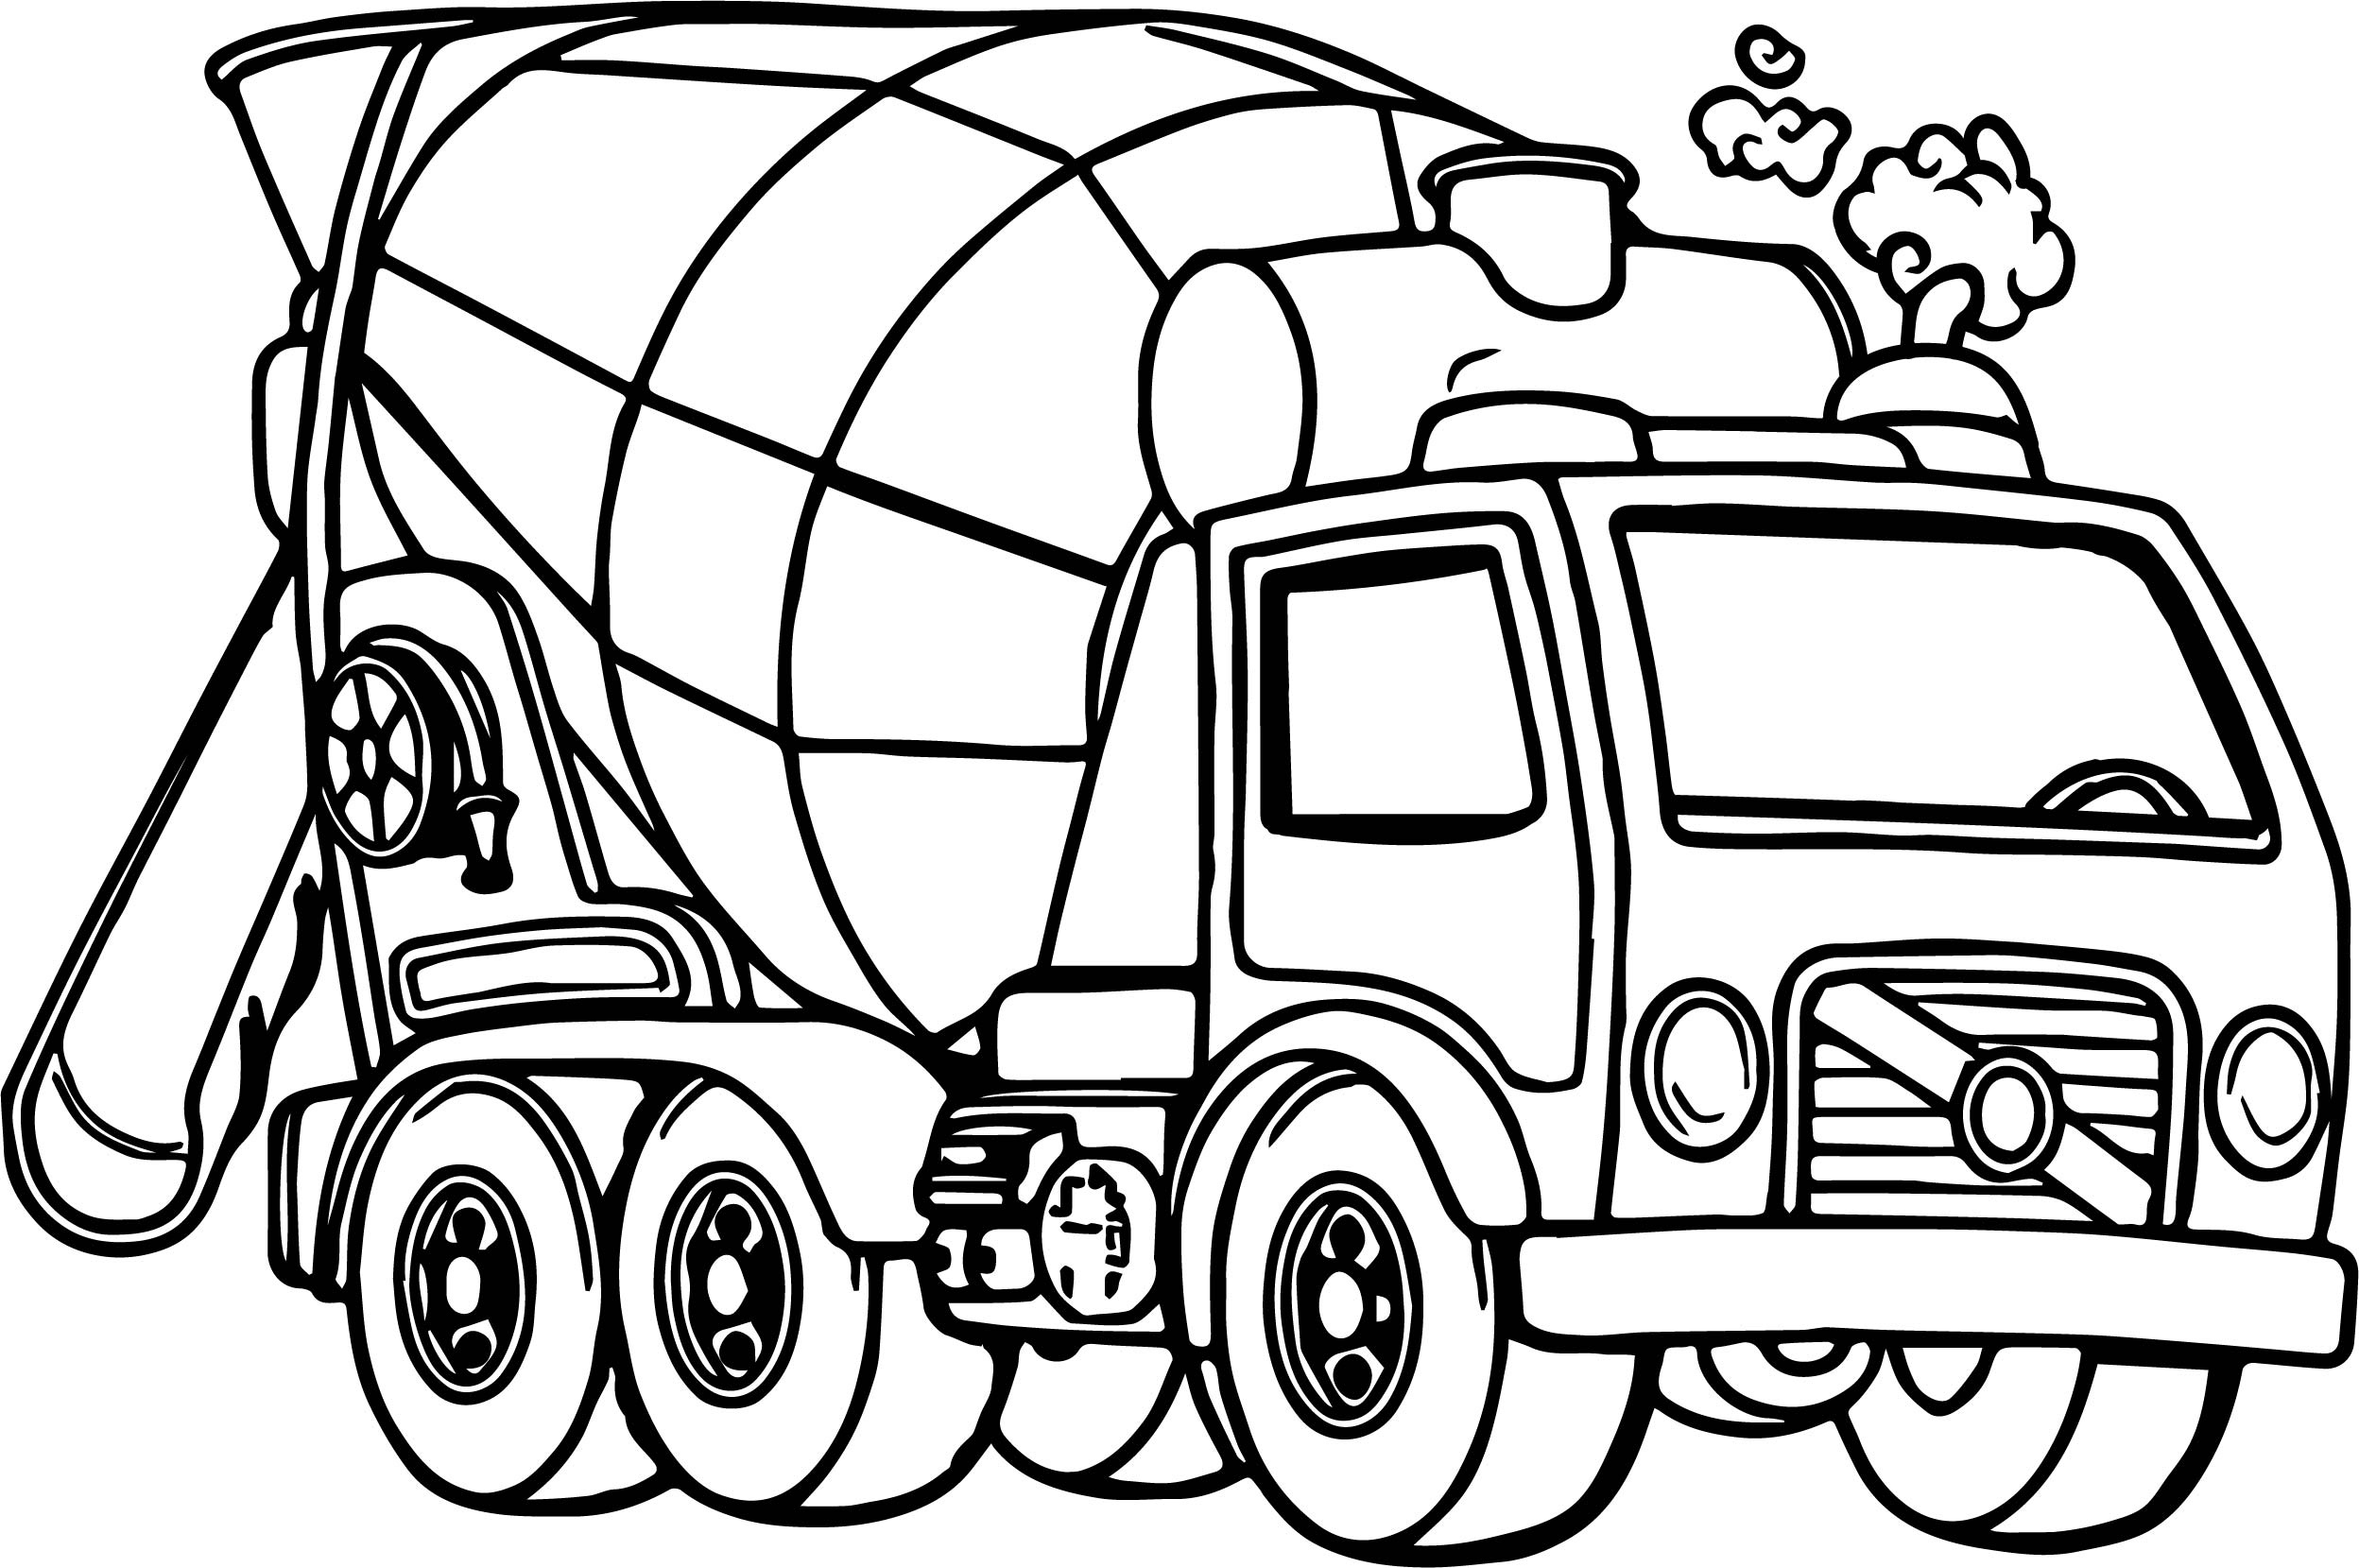 Truck Coloring Pages for Kids (Page 1) - Line.17QQ.com